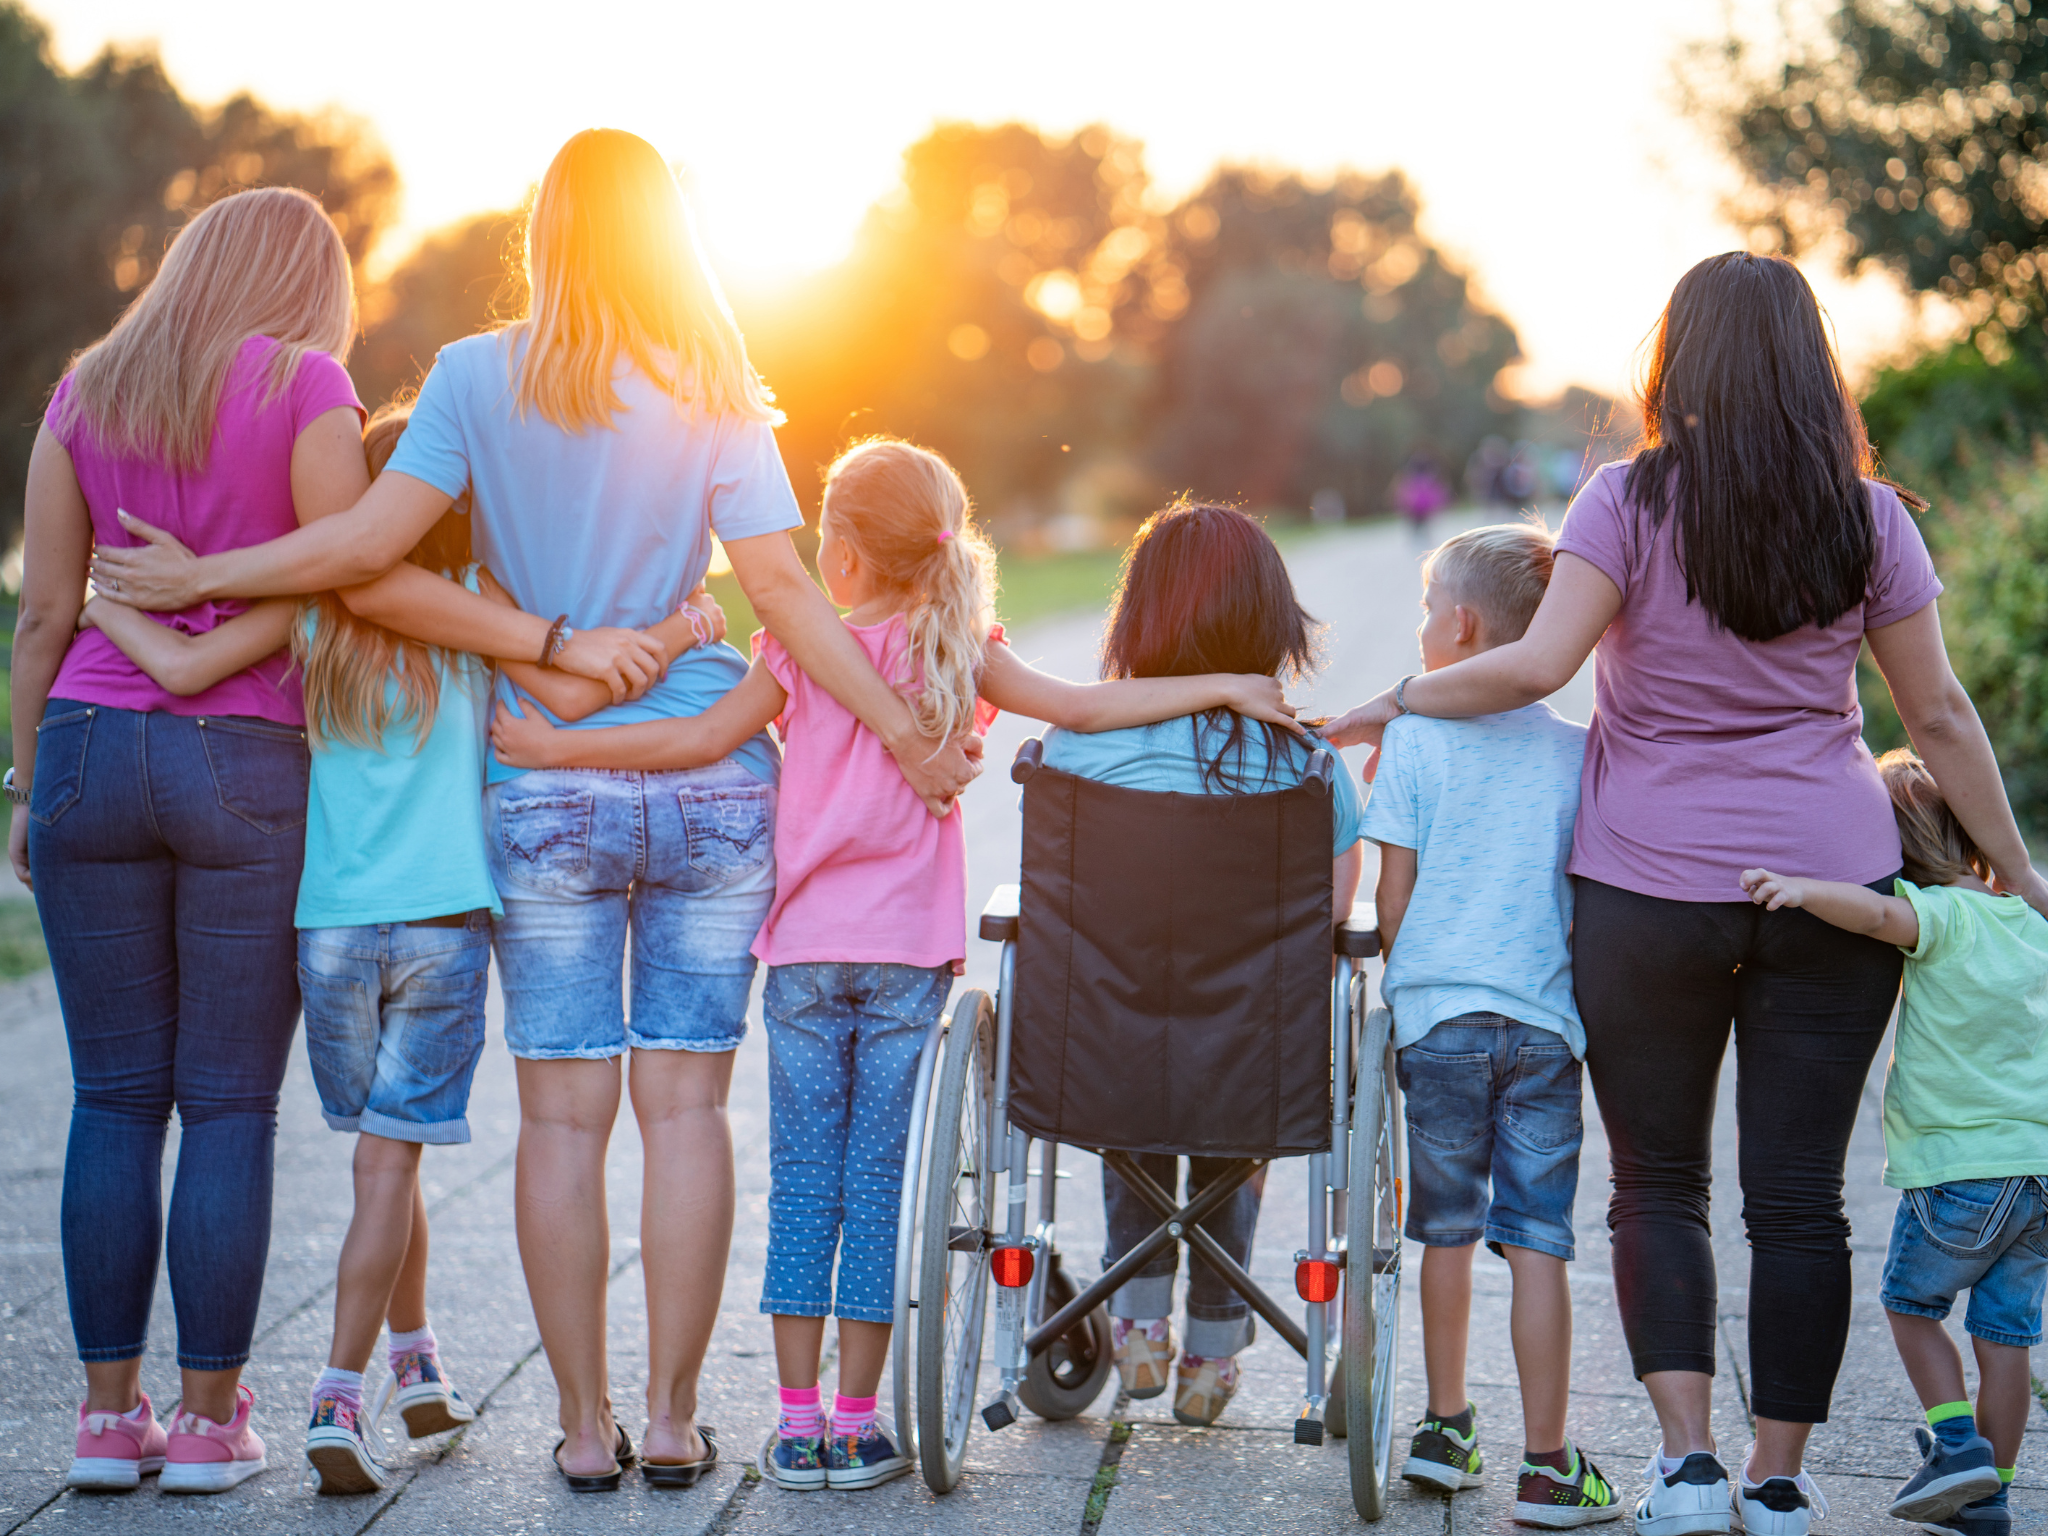 An inclusive family outing in the park, with a child in a wheelchair joining the fun. They all have their arms wrapped around one another and their backs to the camera. The sun is shining through the trees off in the distance.